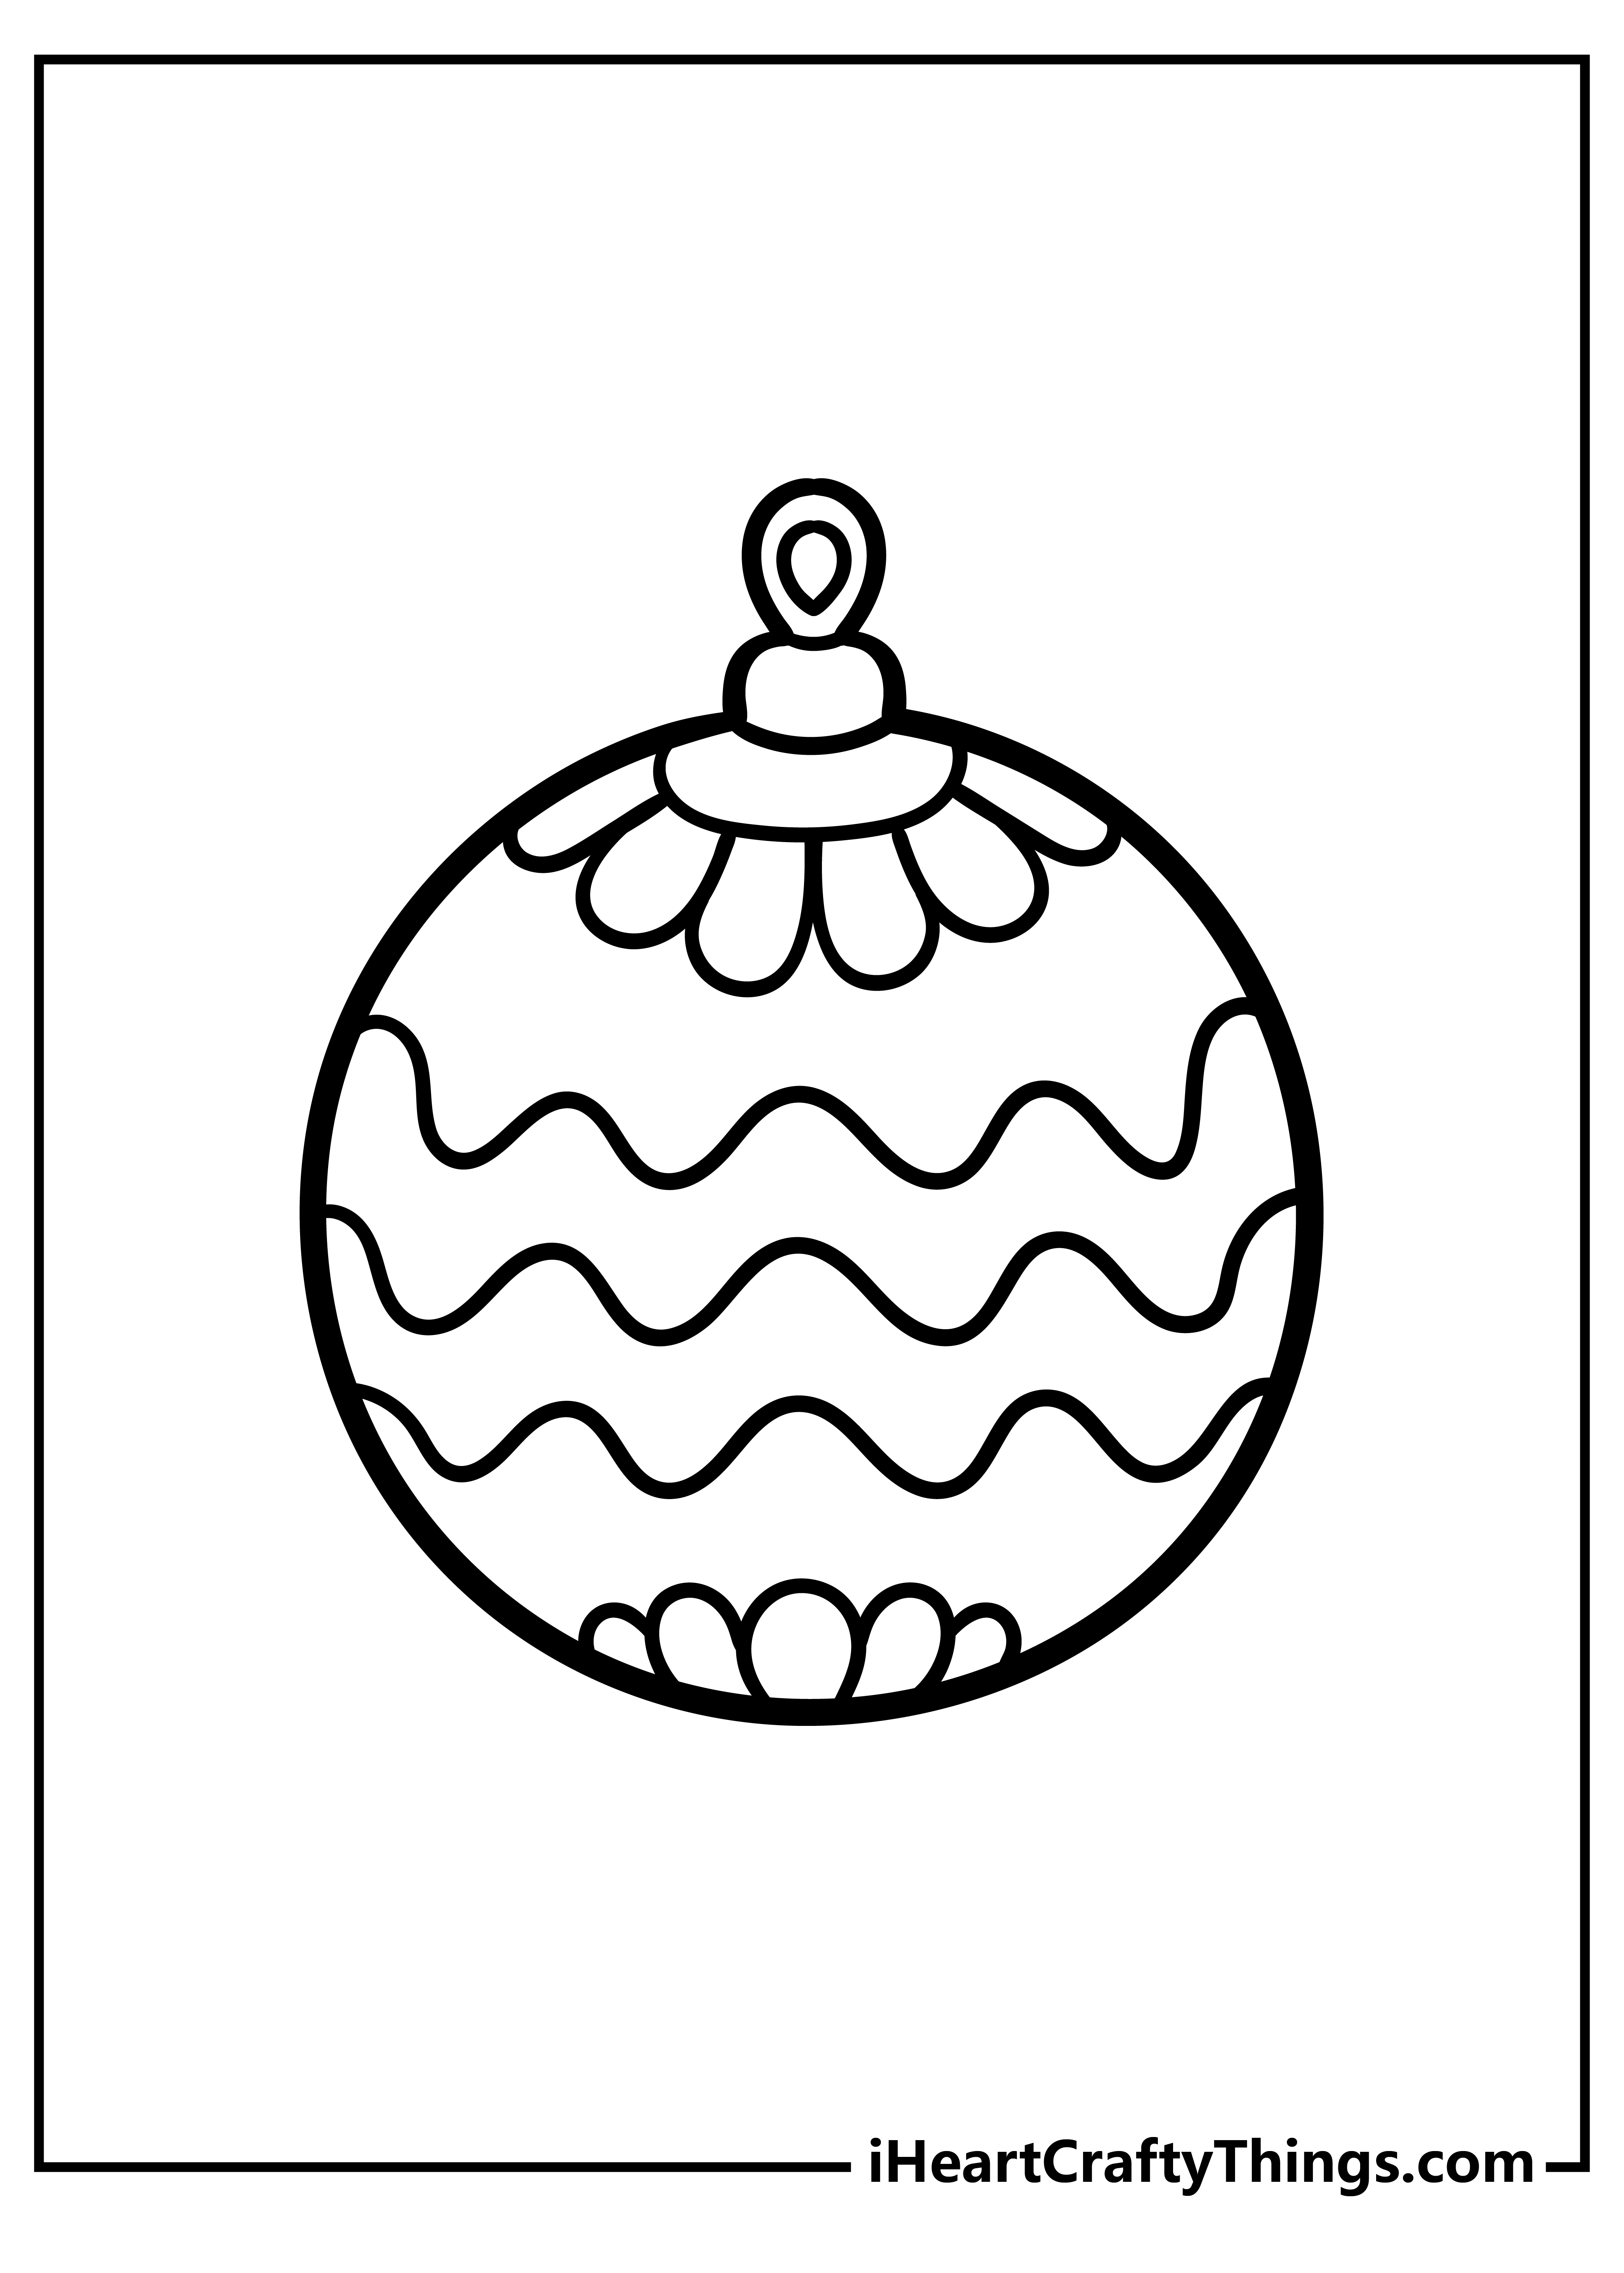 Christmas Ornament Coloring Pages for kids free download